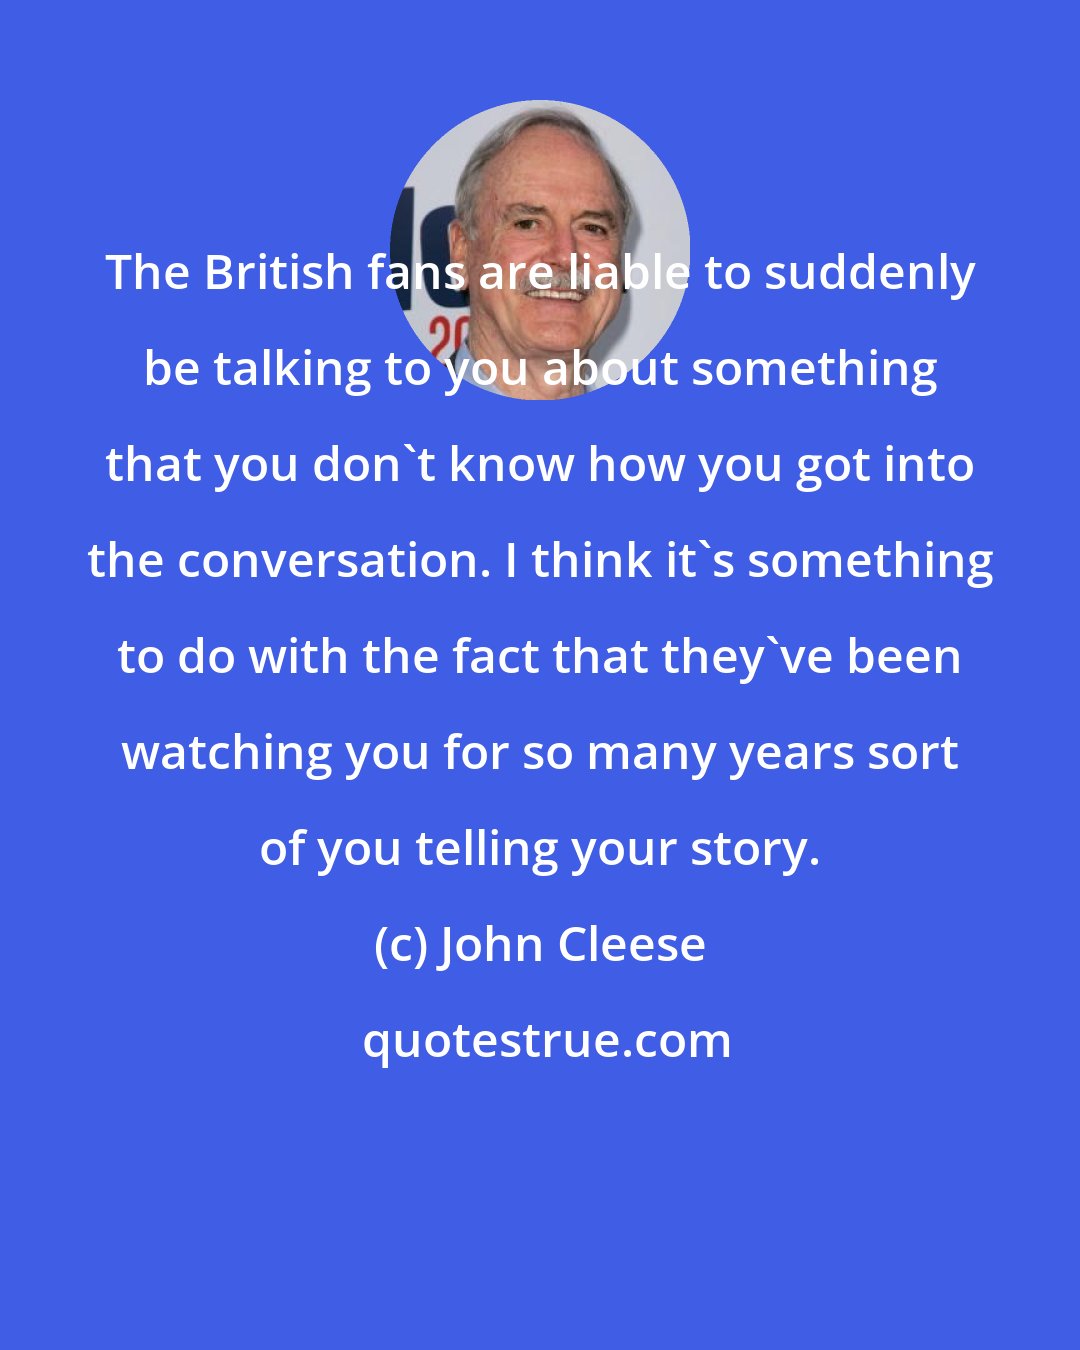 John Cleese: The British fans are liable to suddenly be talking to you about something that you don't know how you got into the conversation. I think it's something to do with the fact that they've been watching you for so many years sort of you telling your story.